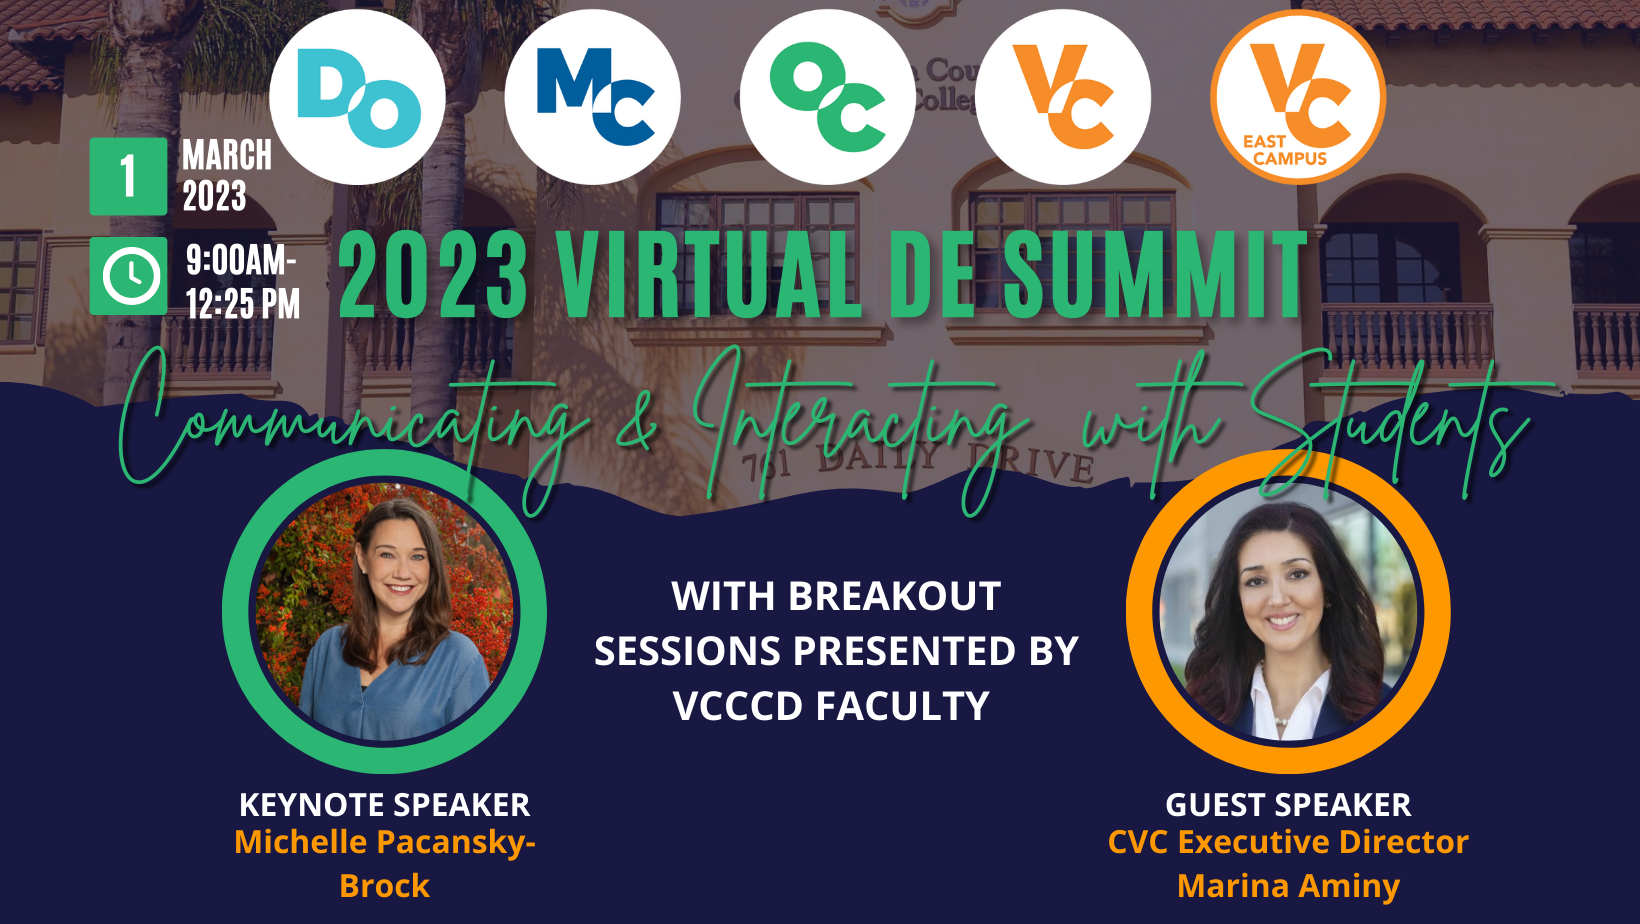 Virtual VCCCD DE Summit March 1, 2023 Presentations from Michelle Pacansky Brock Keynote speaker, and Dr. Marina Aminy from the CVC in addition to presentations from faculty